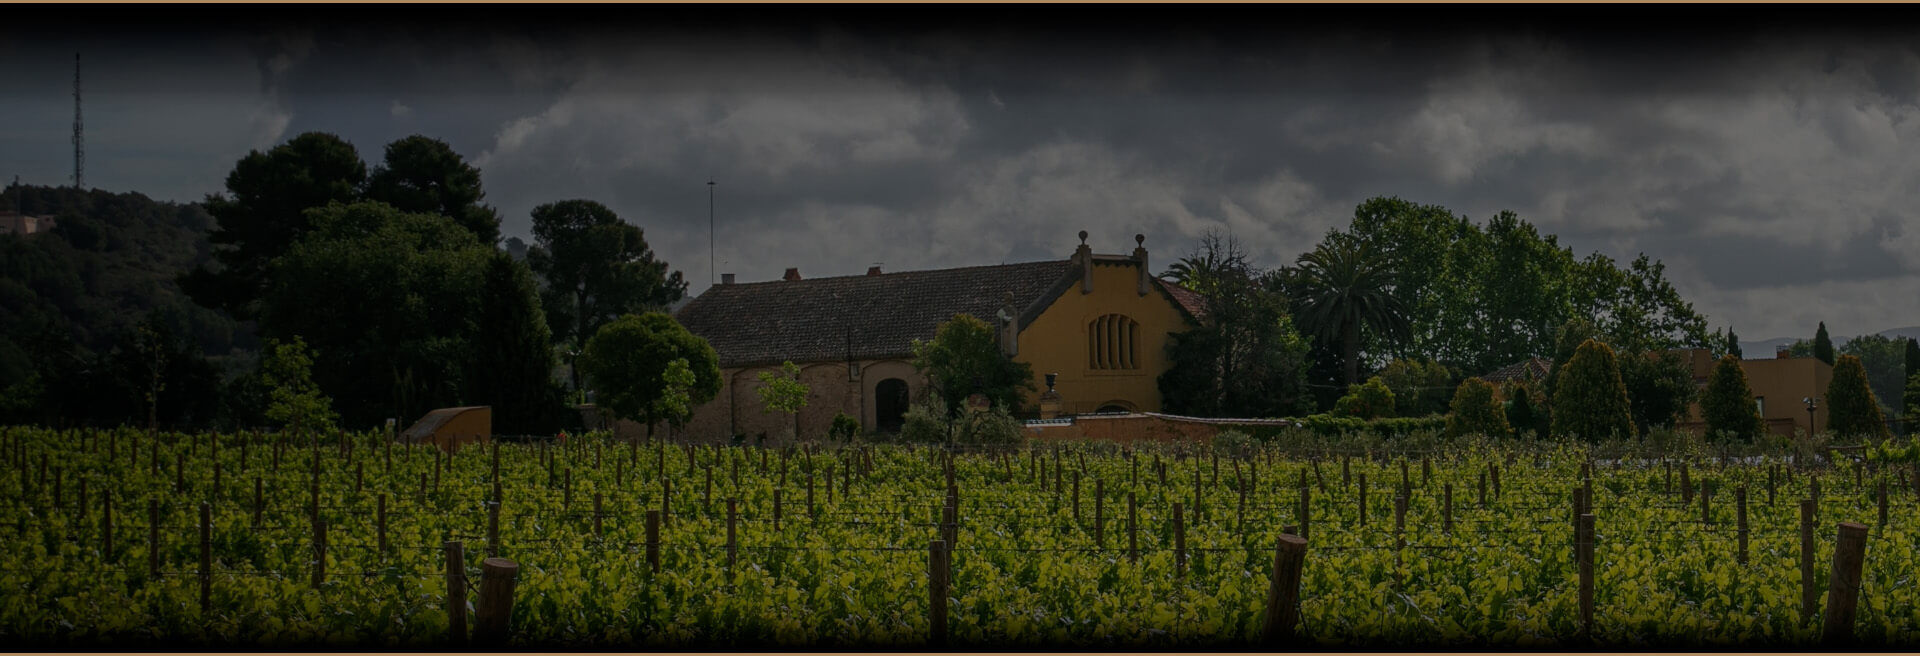 Vineyard with dark stormy clouds overhead, indicating a change in climate